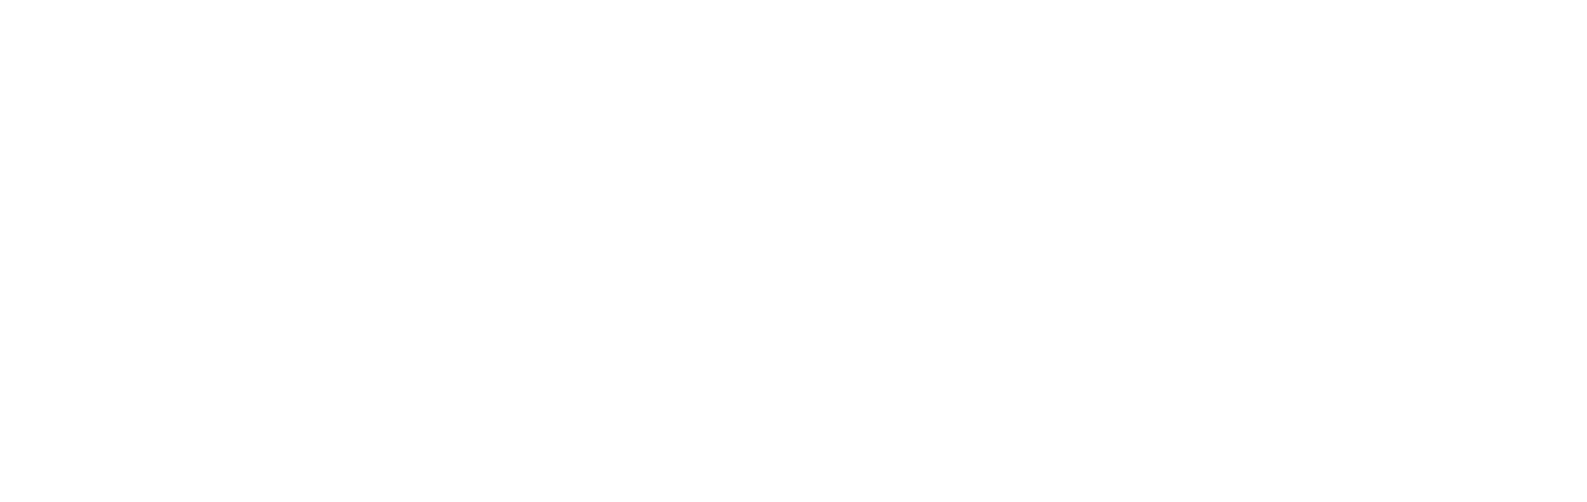 African Rainbow Minerals logo large for dark backgrounds (transparent PNG)